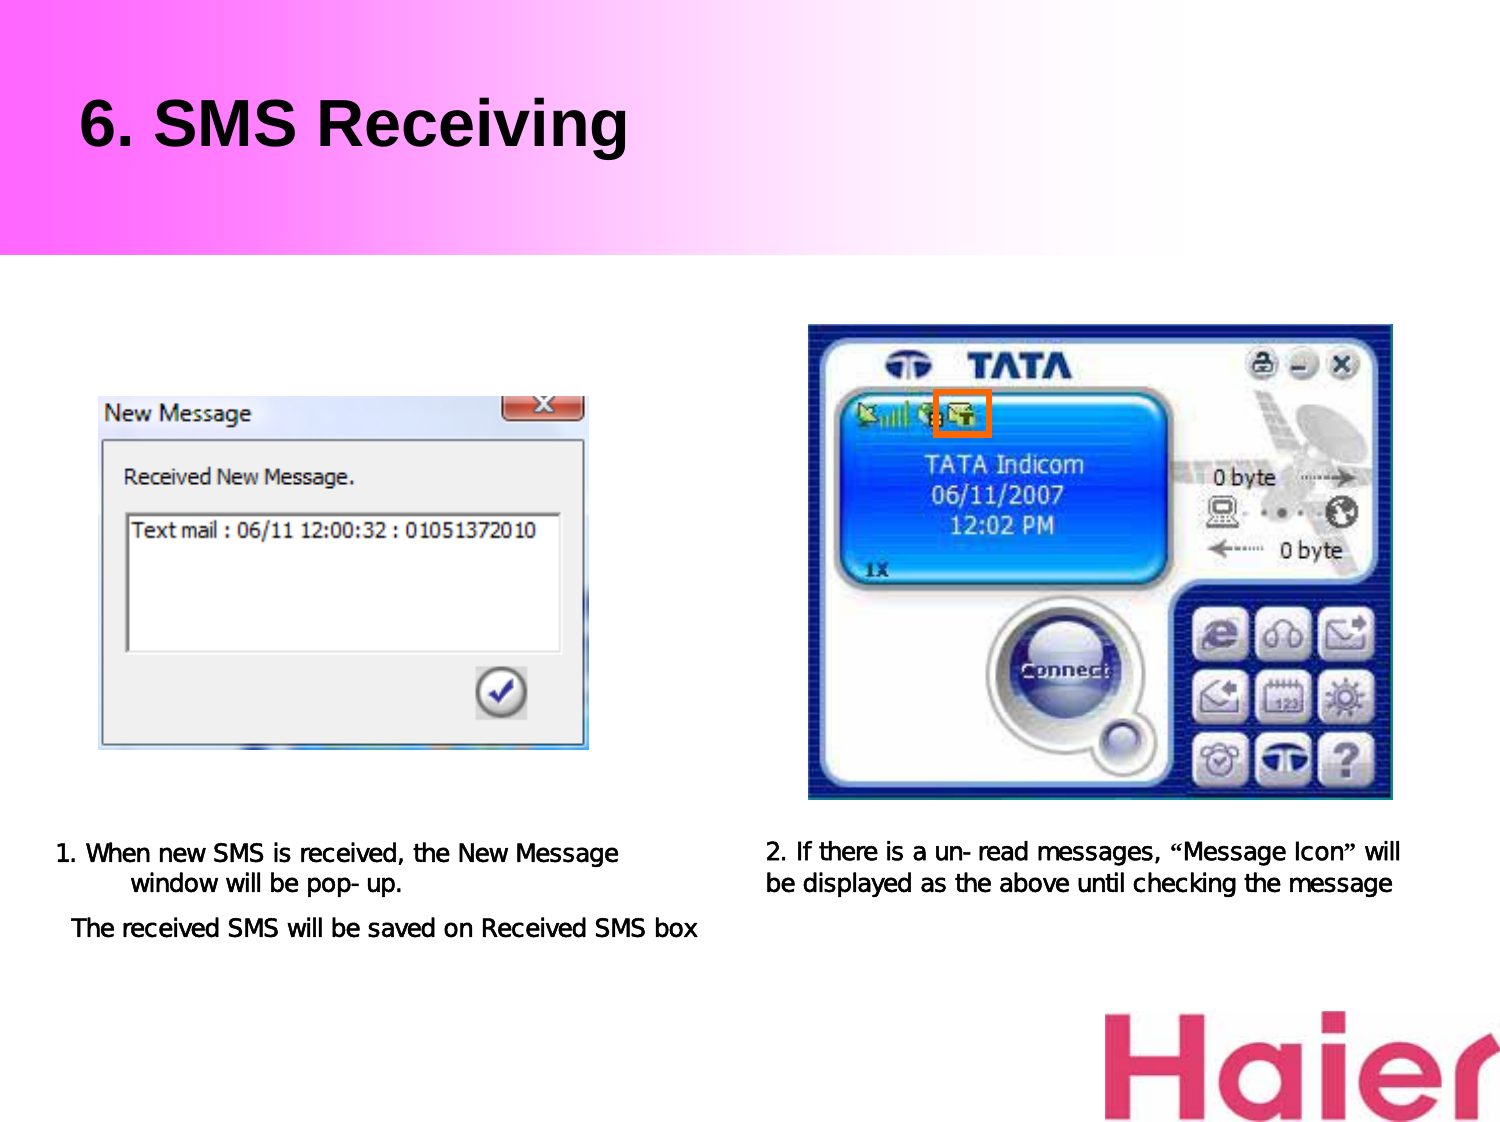 6. SMS Receiving1. When new SMS is received, the New Message window will be pop-up. The received SMS will be saved on Received SMS box2. If there is a un-read messages, “Message Icon”will be displayed as the above until checking the message